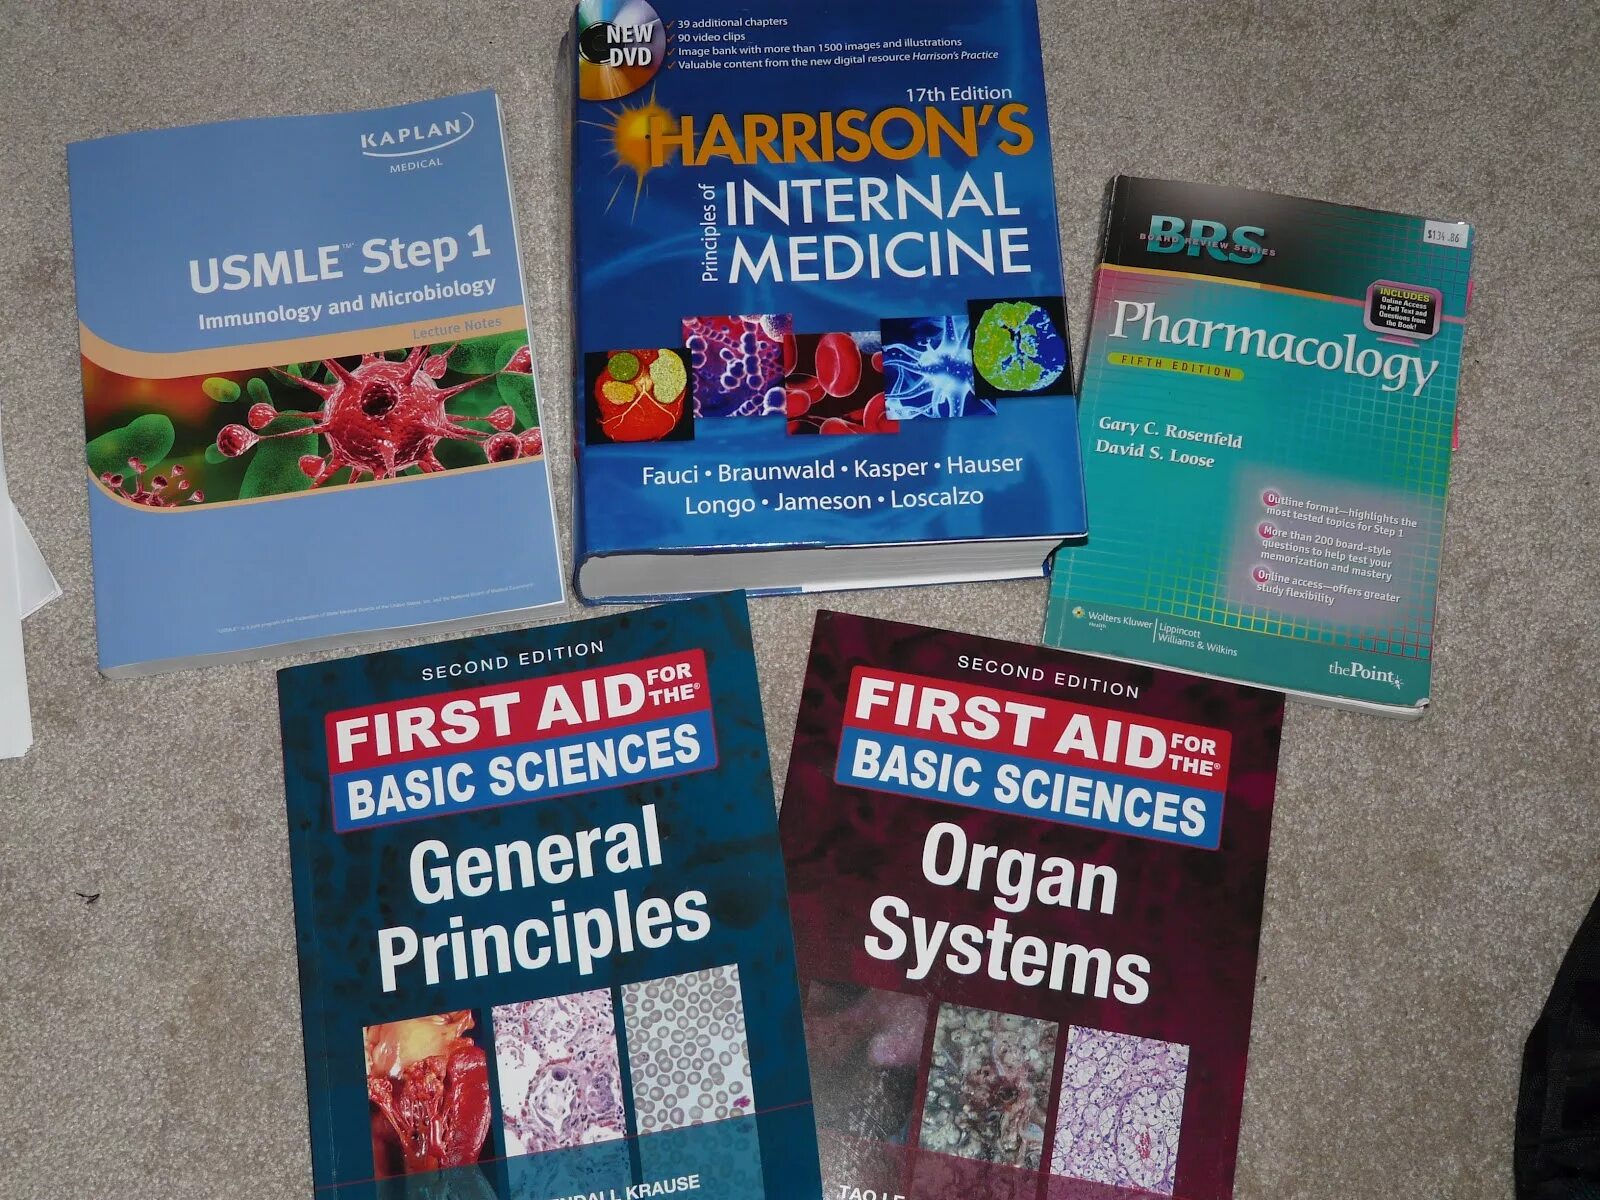 First Aid for the USMLE Step 1 2021. First Aid USMLE Step 1. First Aid USMLE Step. Usmle step